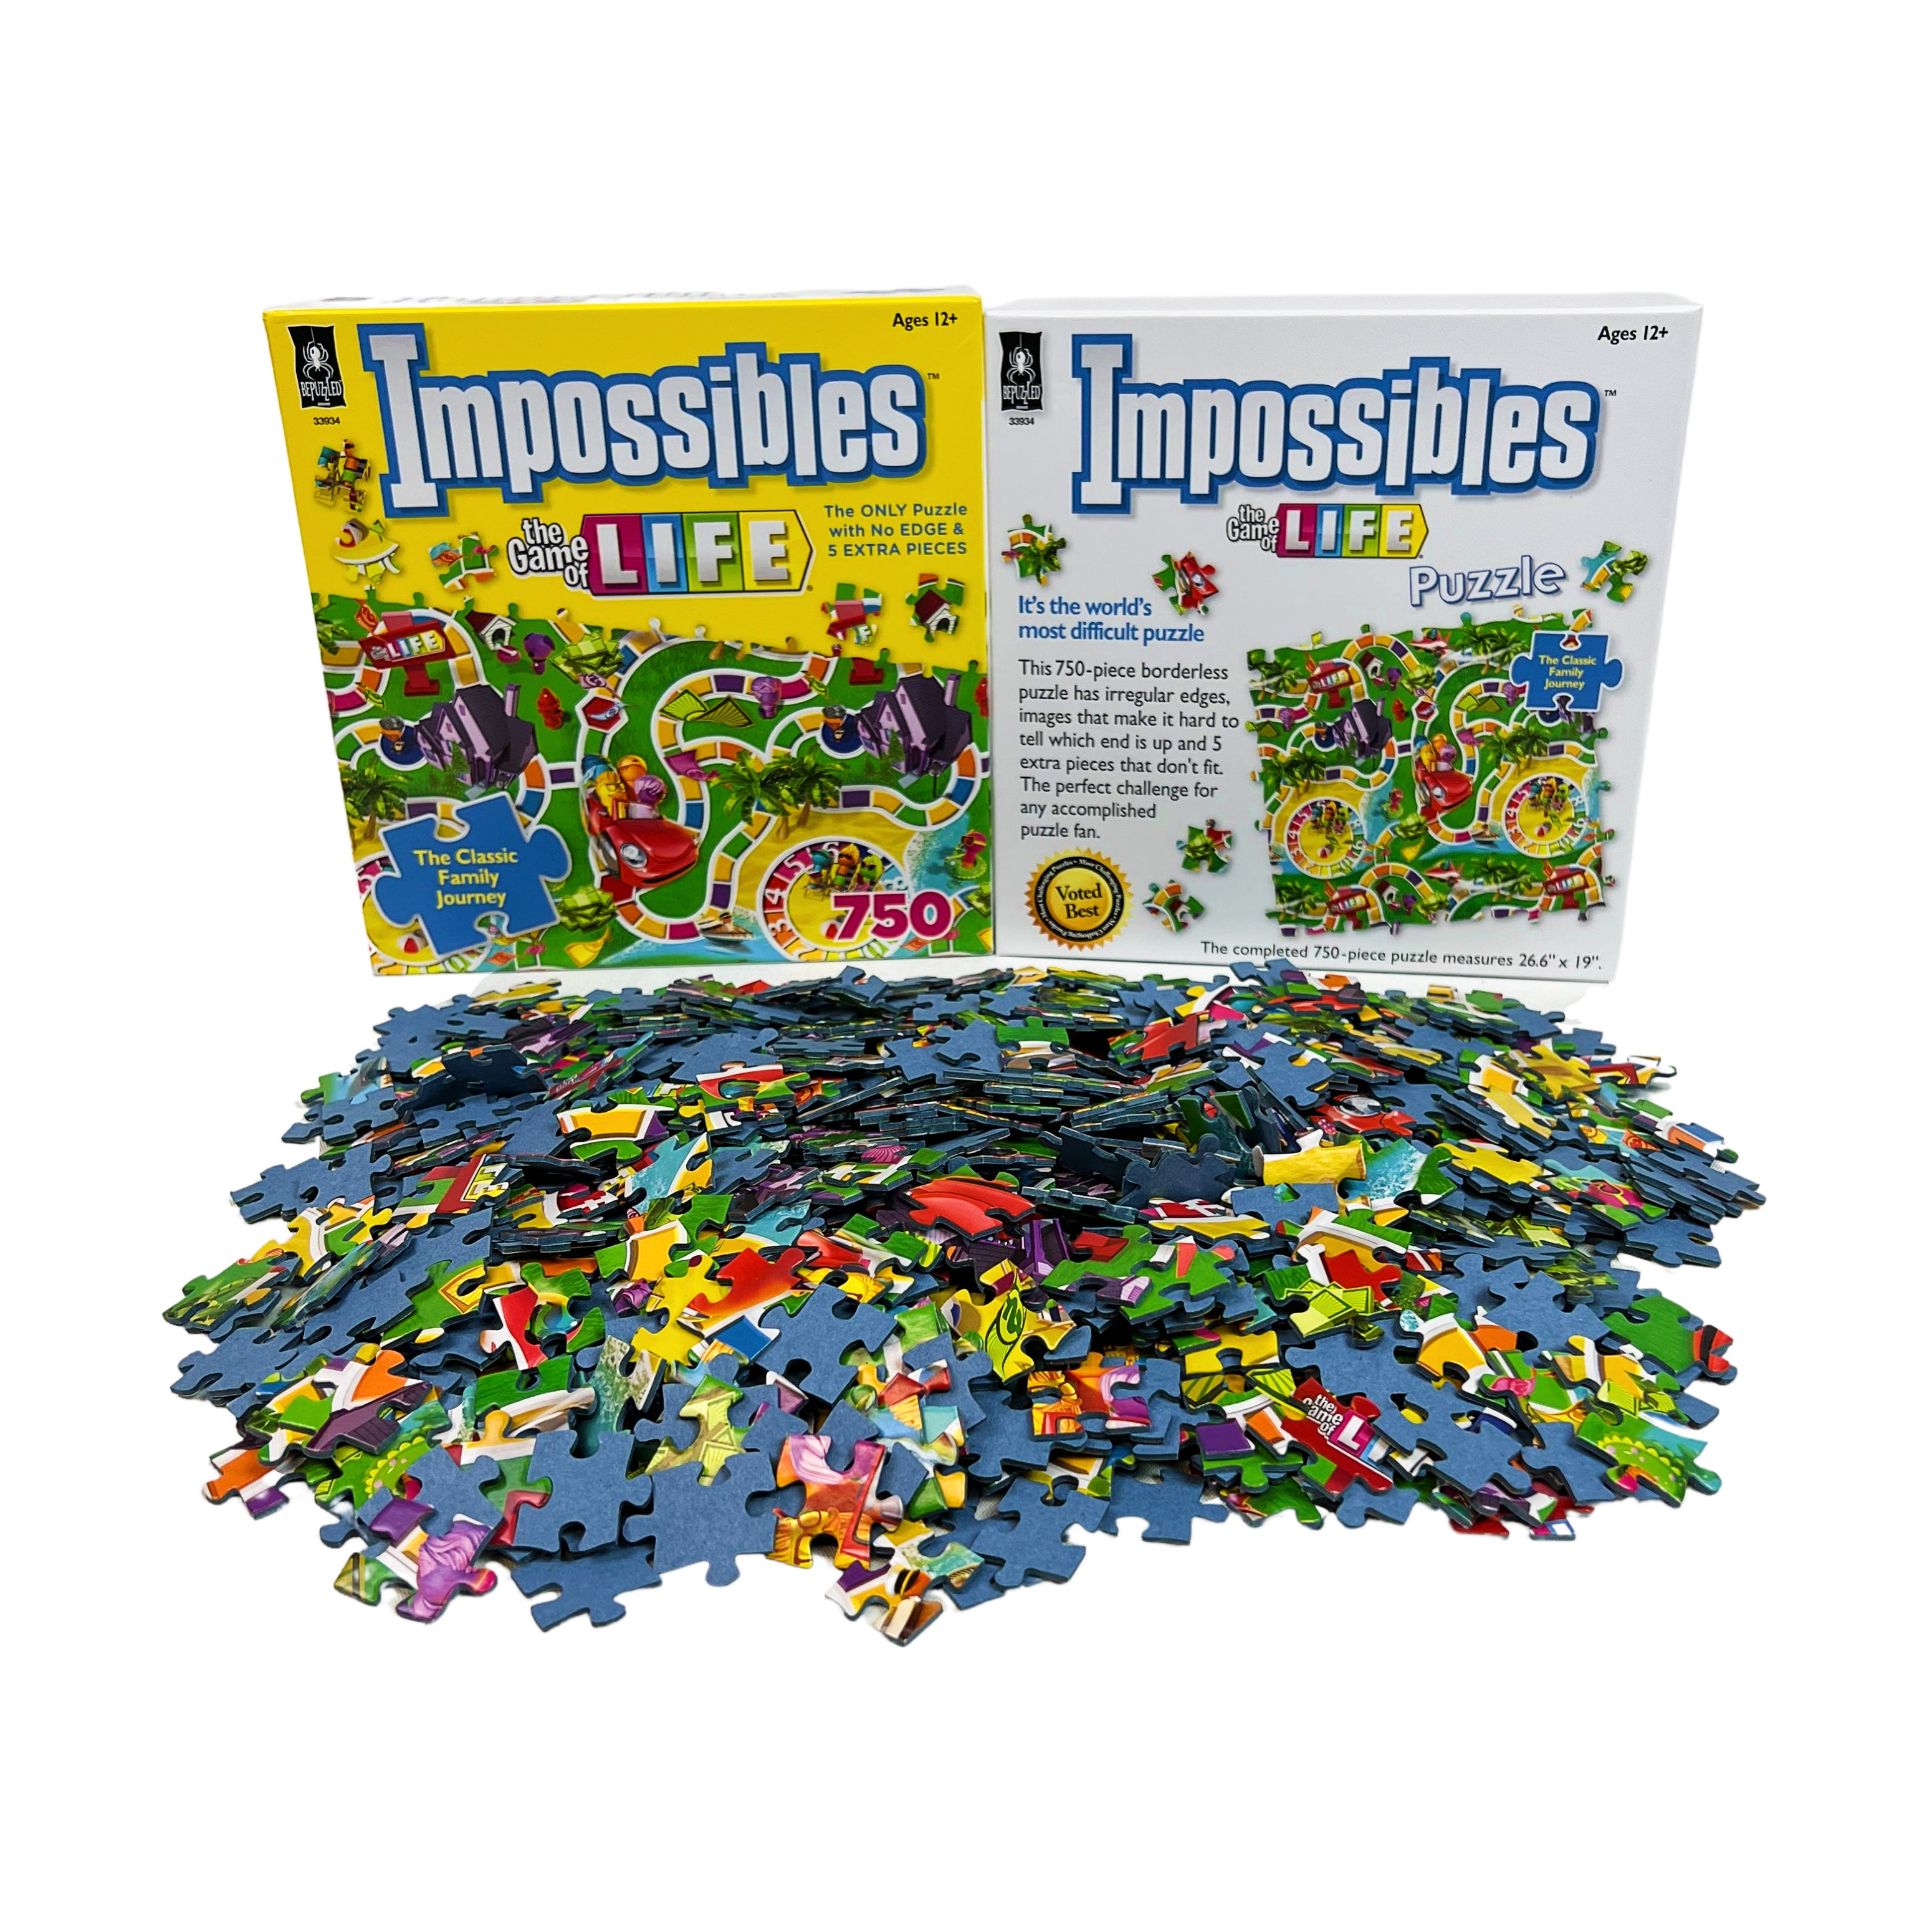 Impossible Difficult Puzzle 1000 Piece, Hard Jigsaw Puzzles for Adults,  Challenge Colorful Puzzles for Adults 1000 Pieces and up